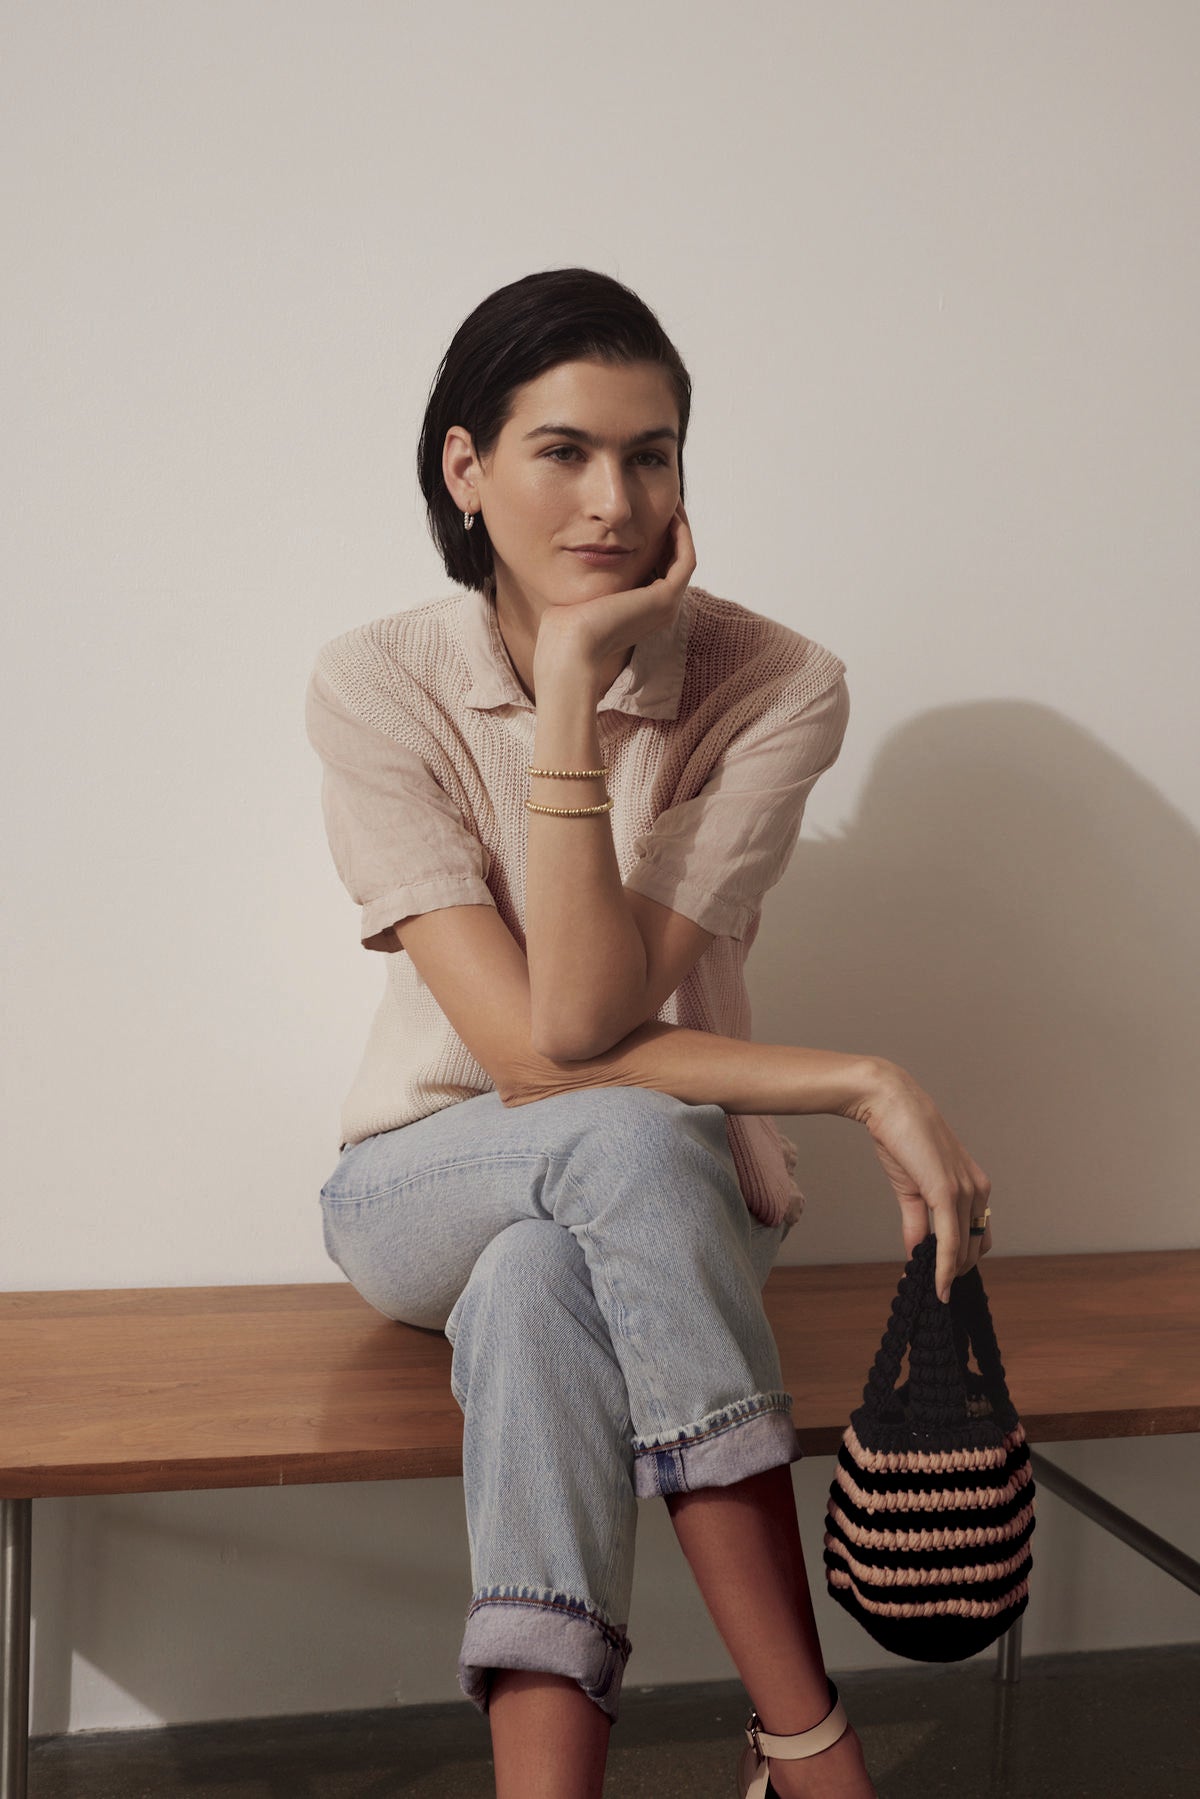   A woman sits on a wooden bench, resting her chin on her hand, wearing a pink blouse, jeans, and holding a Velvet by Jenny Graham KNOX BAG. 